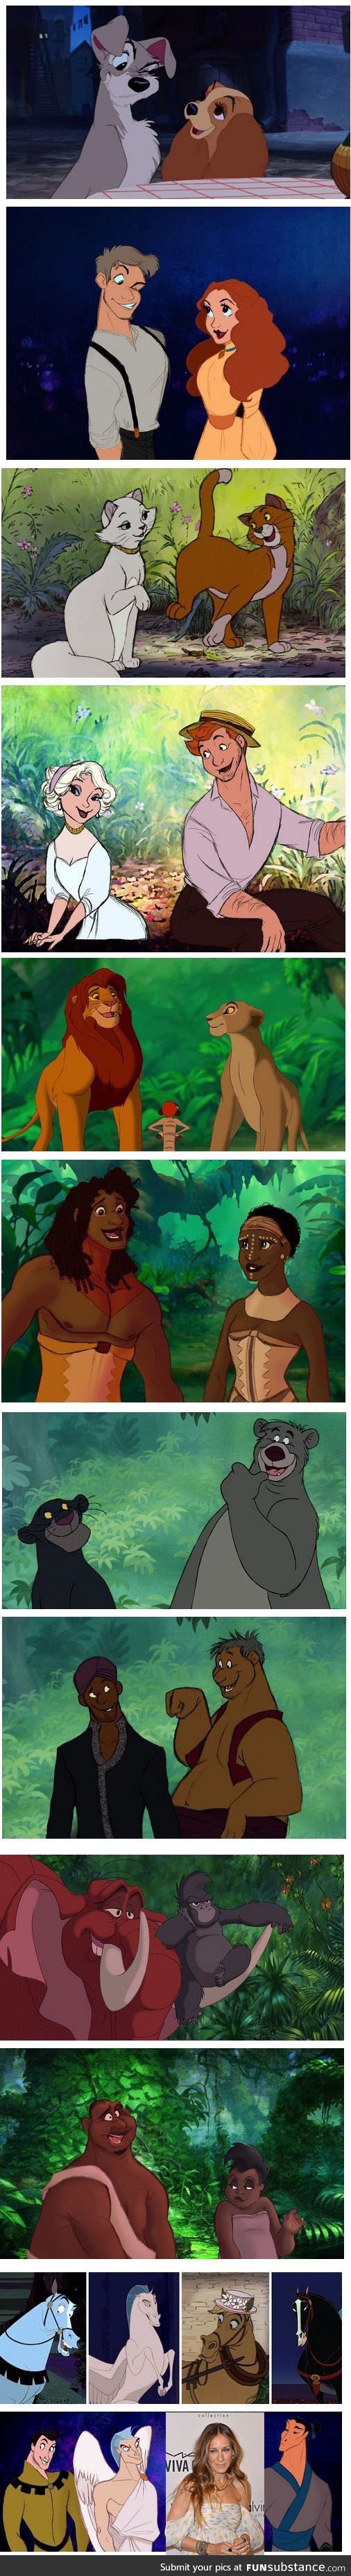 Disney animals and their human forms